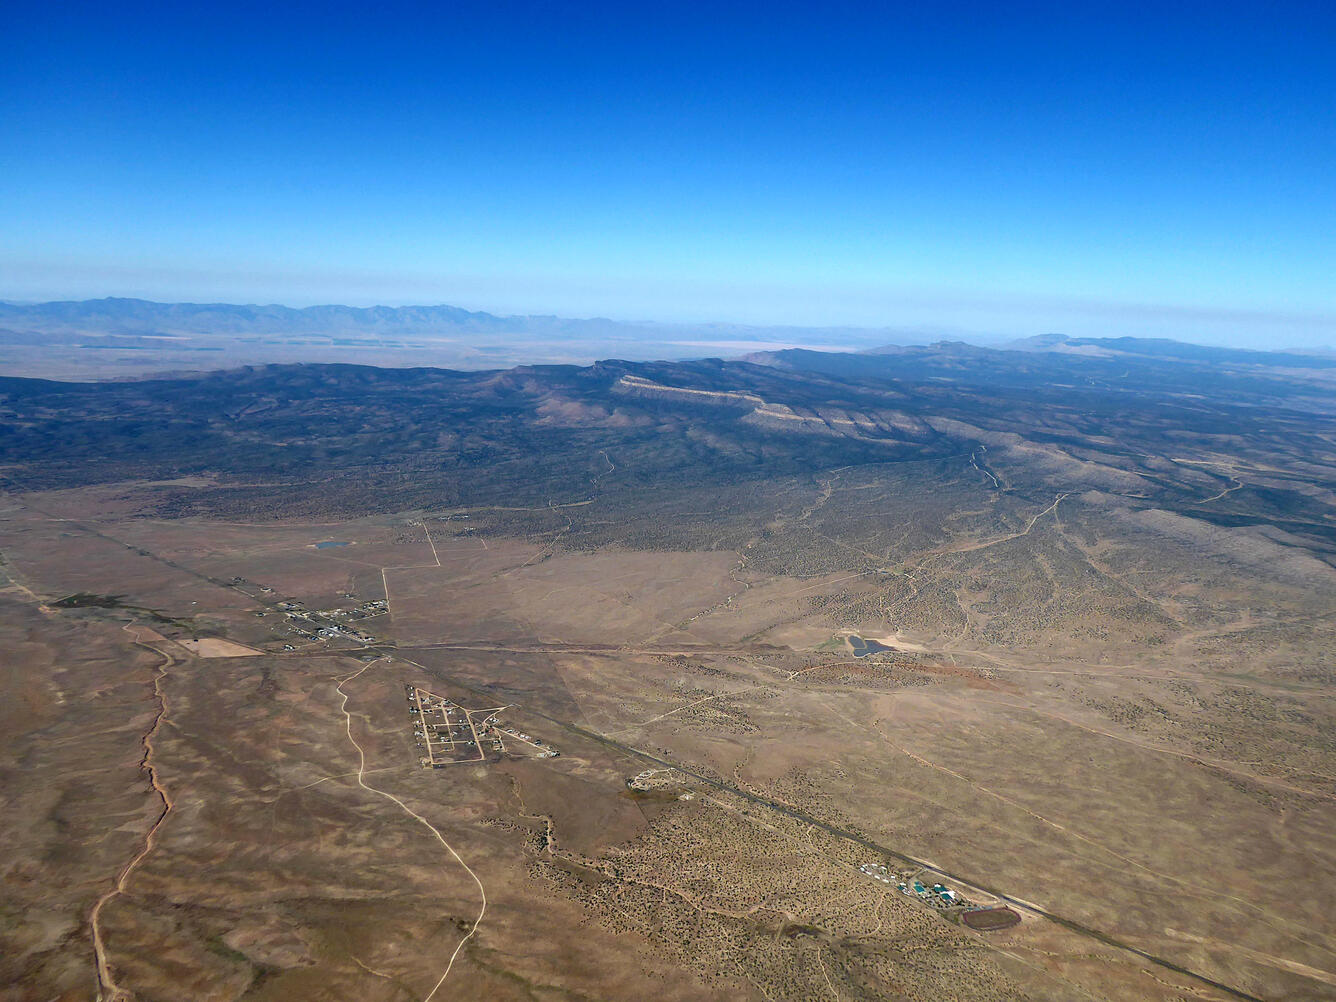 Photograph showing an aerial view from central Truxton basin looking northwest.